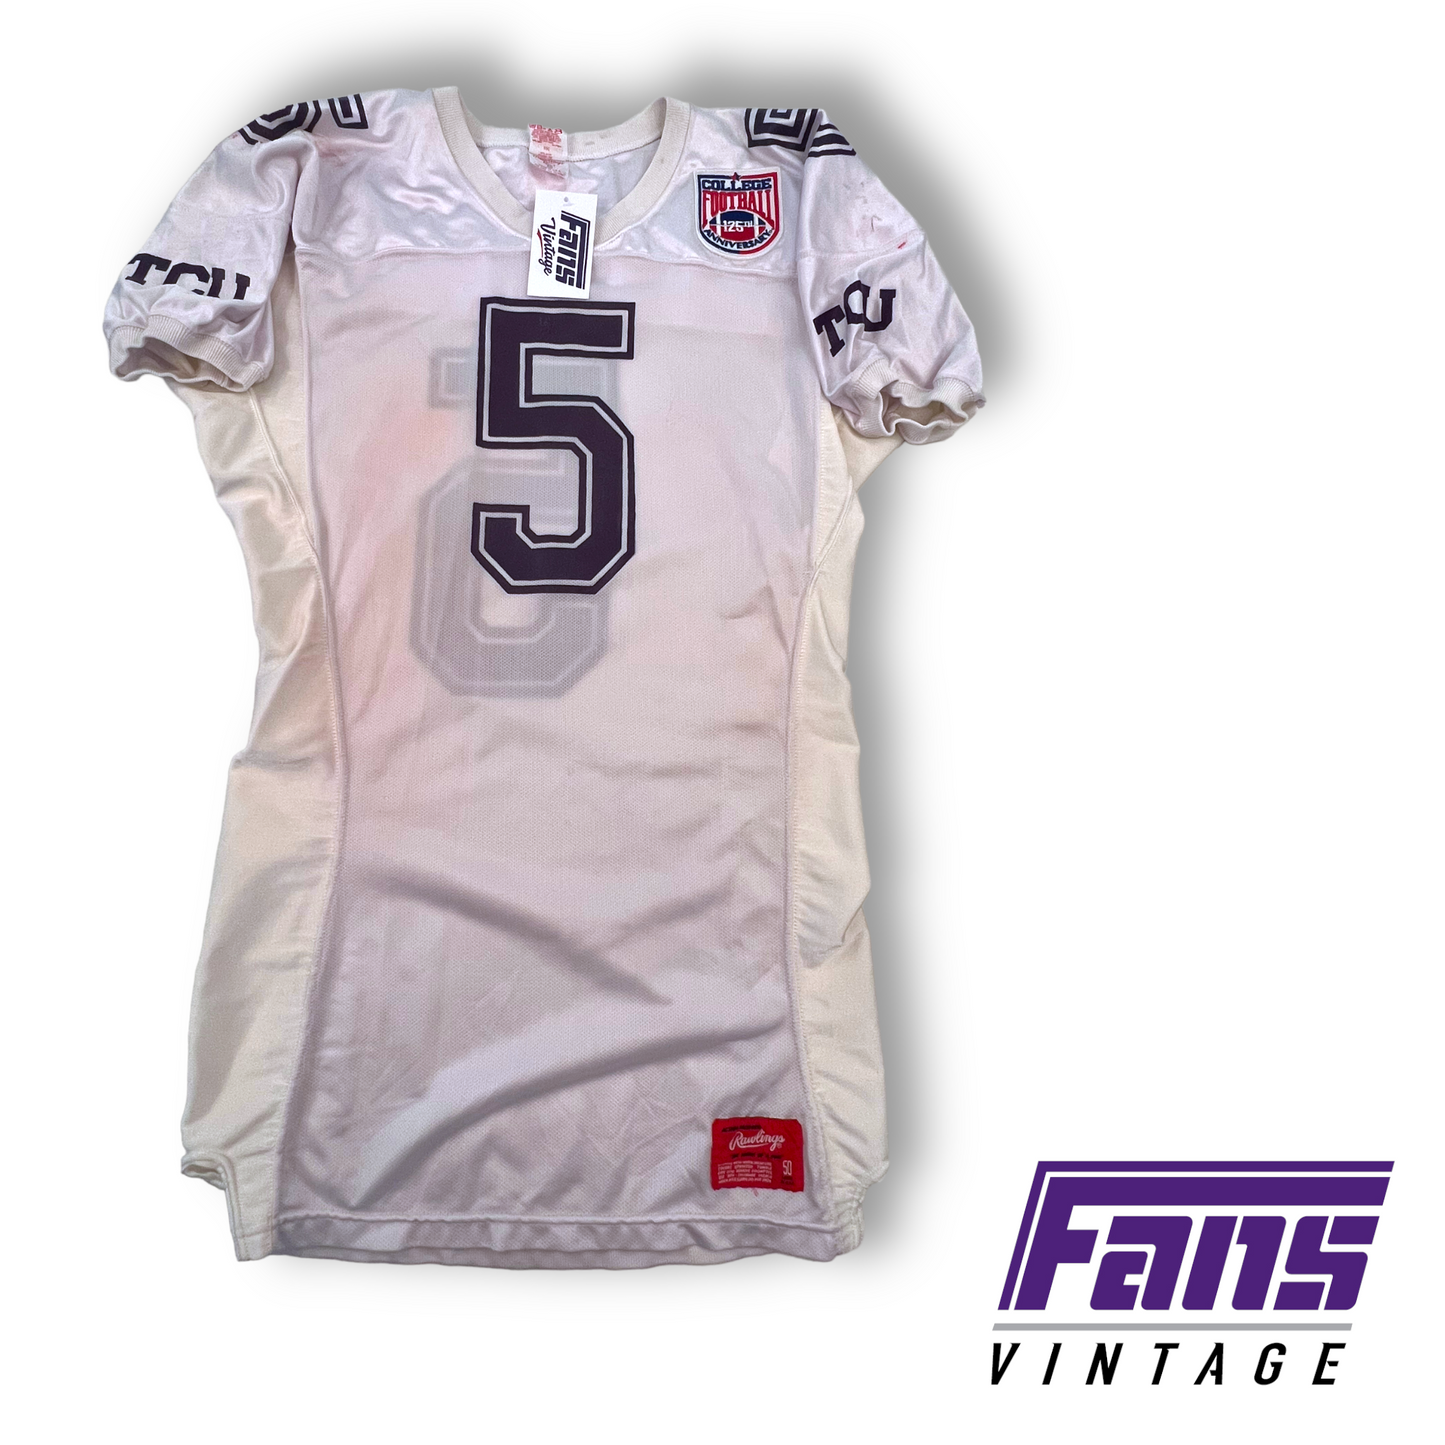 Vintage 90s Game Worn TCU Football Jersey - #5 CFB 125 Patch